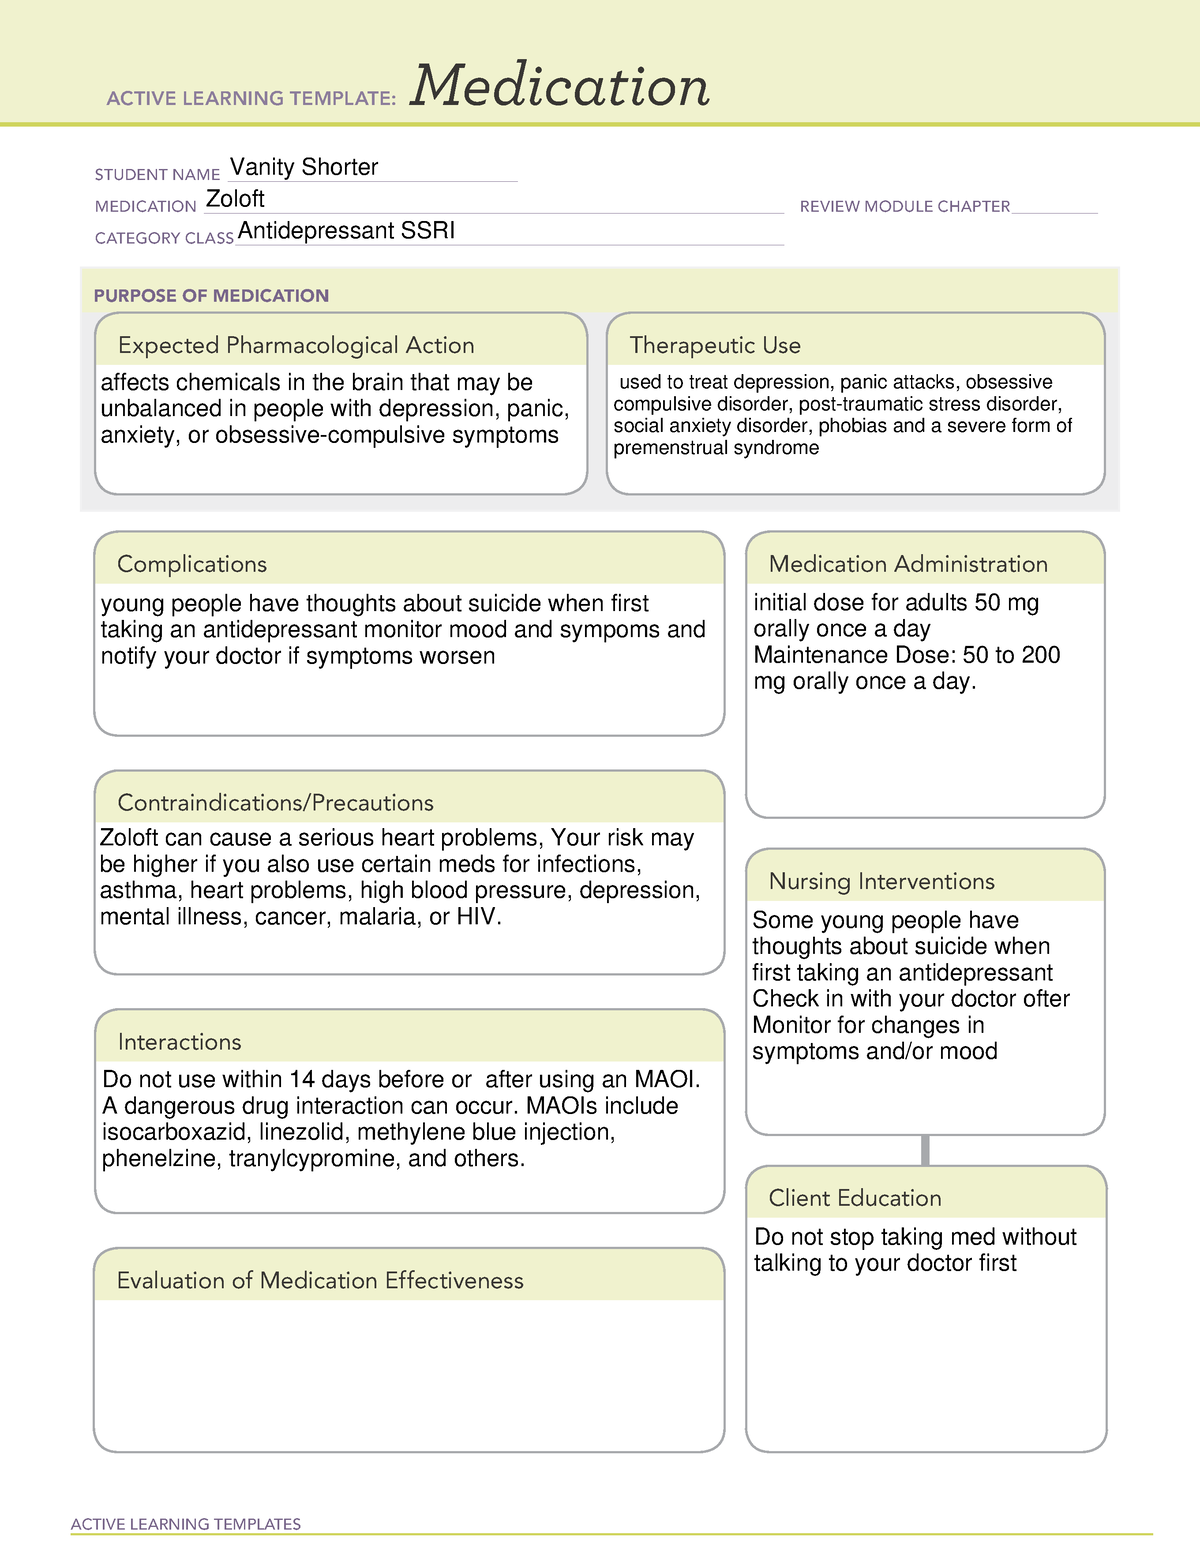 zoloft-ssri-psych-med-active-learning-templates-medication-student